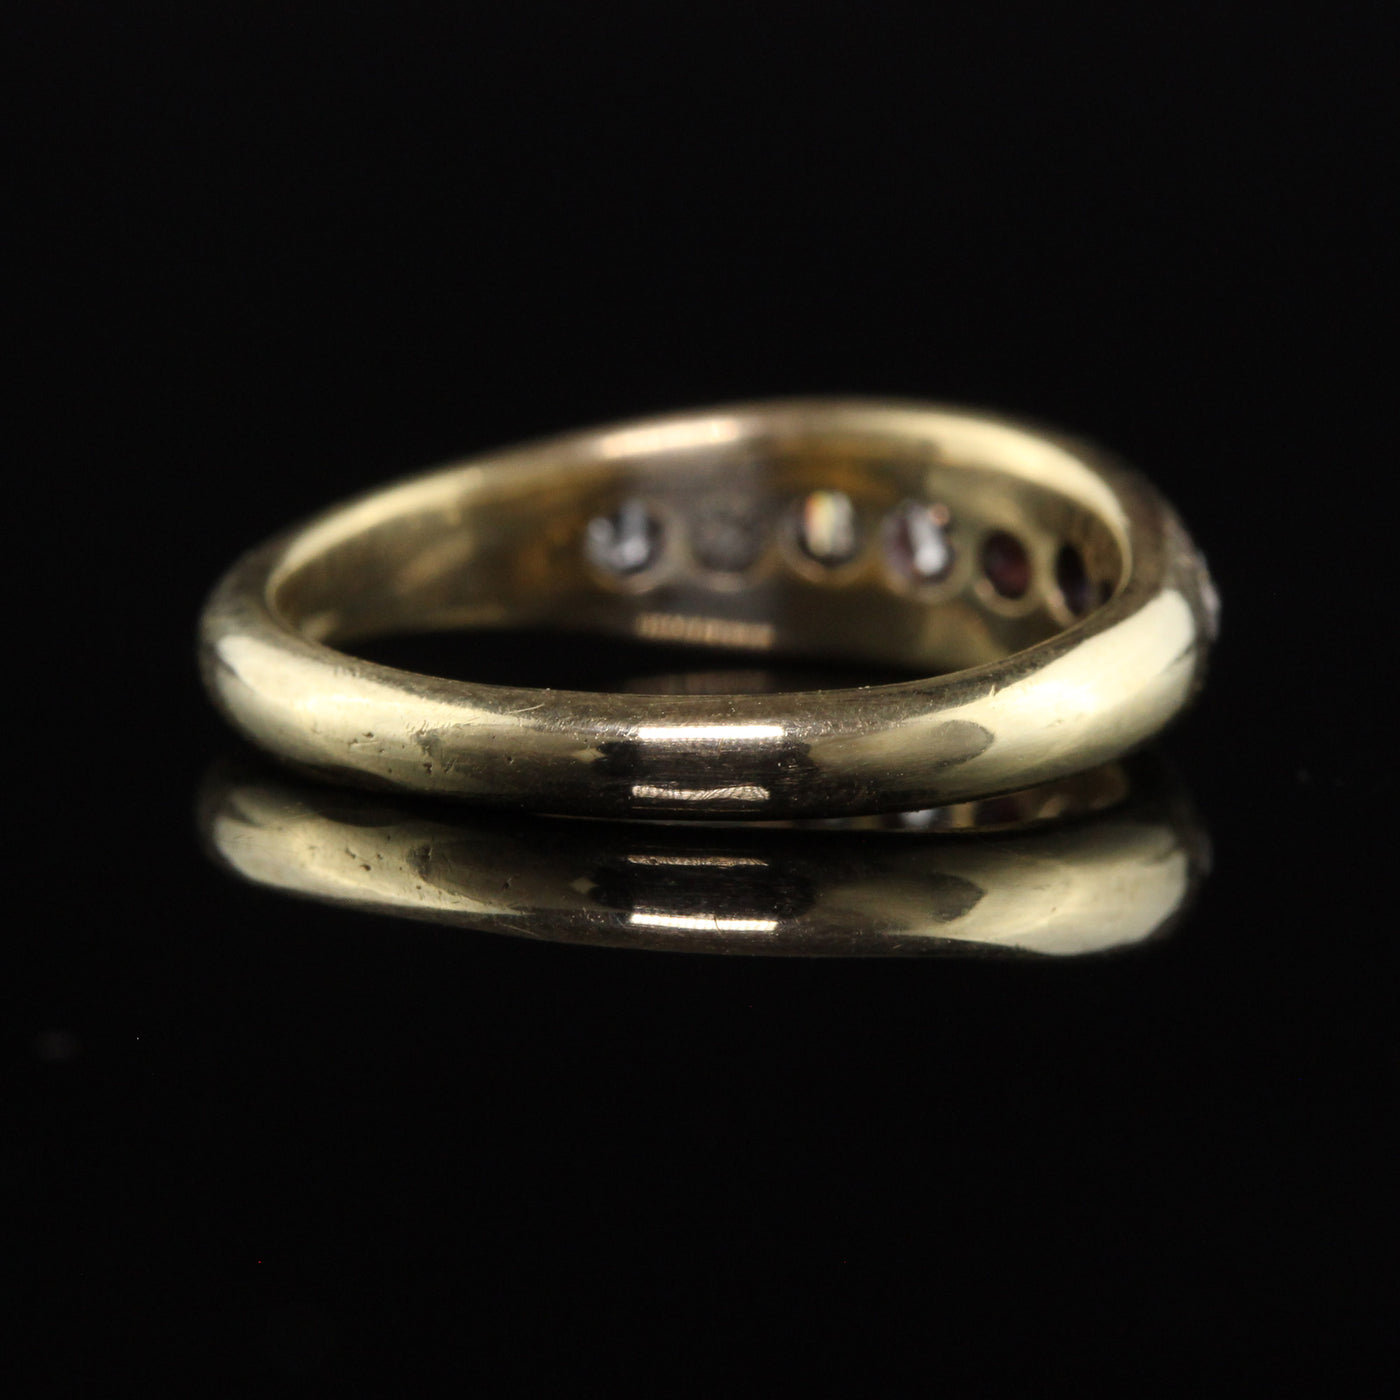 Antique Victorian 14K Yellow Gold Old Mine Diamond Gypsy Ring